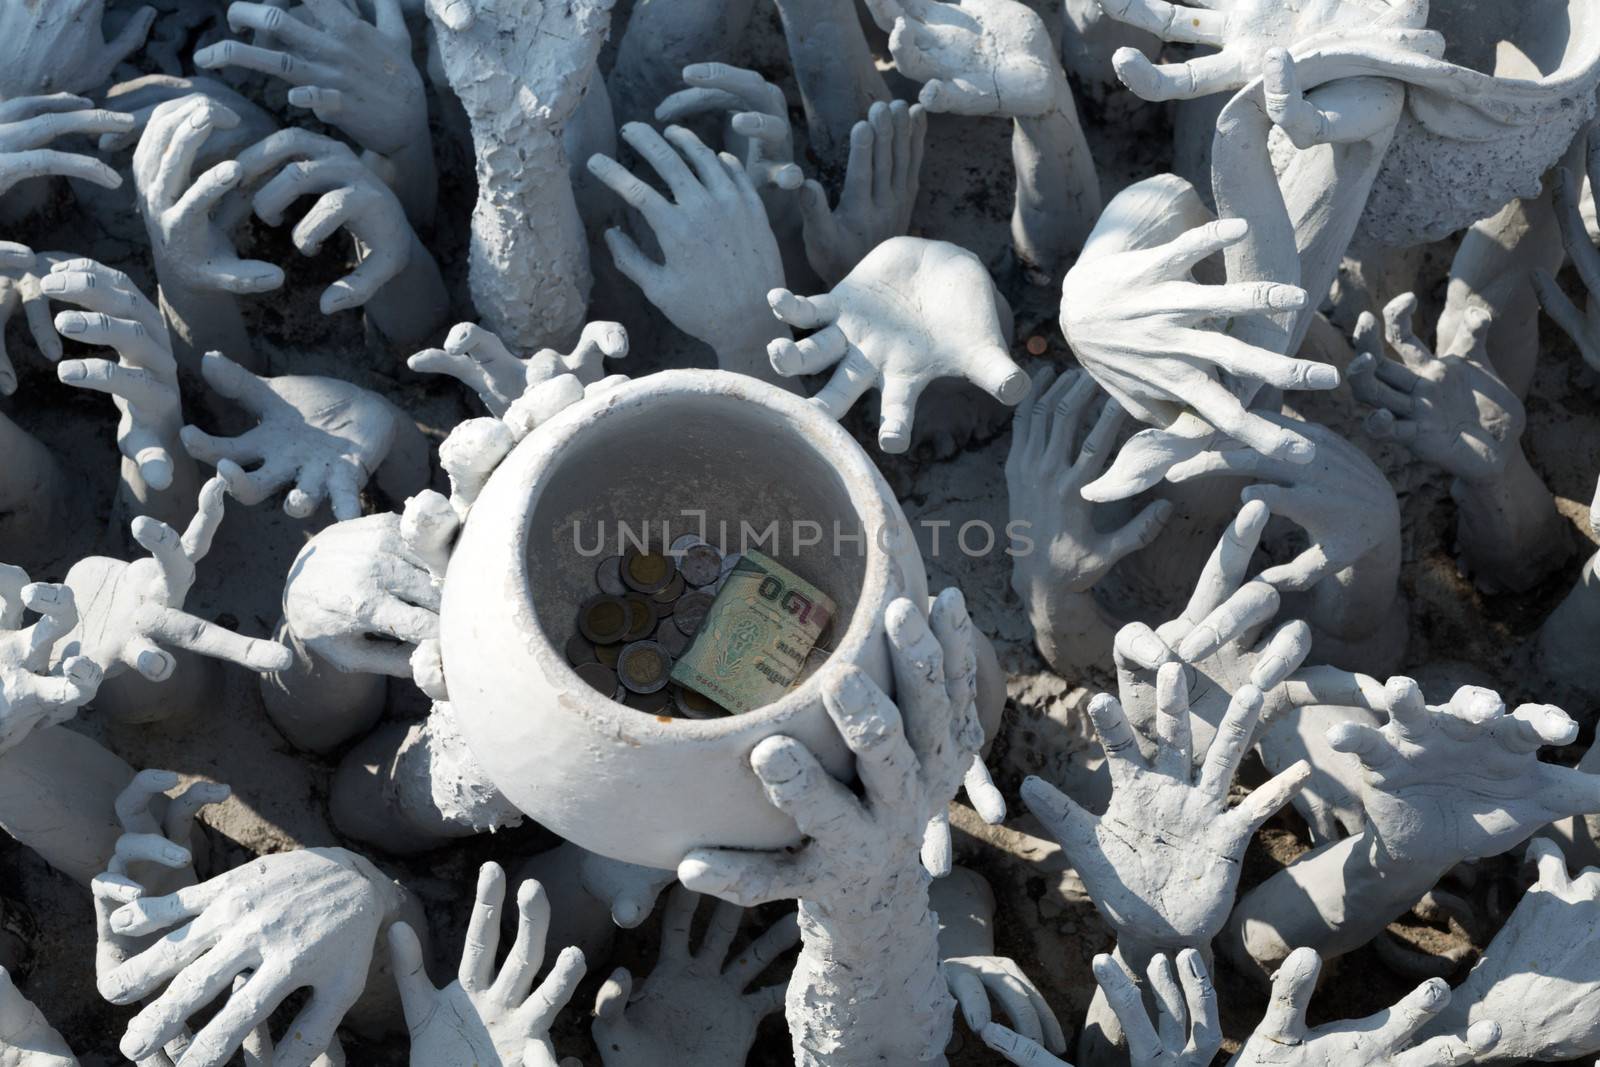 Sculptural composition with his hands and cup. Rong Khun temple, Chiang Rai province, northern Thailand